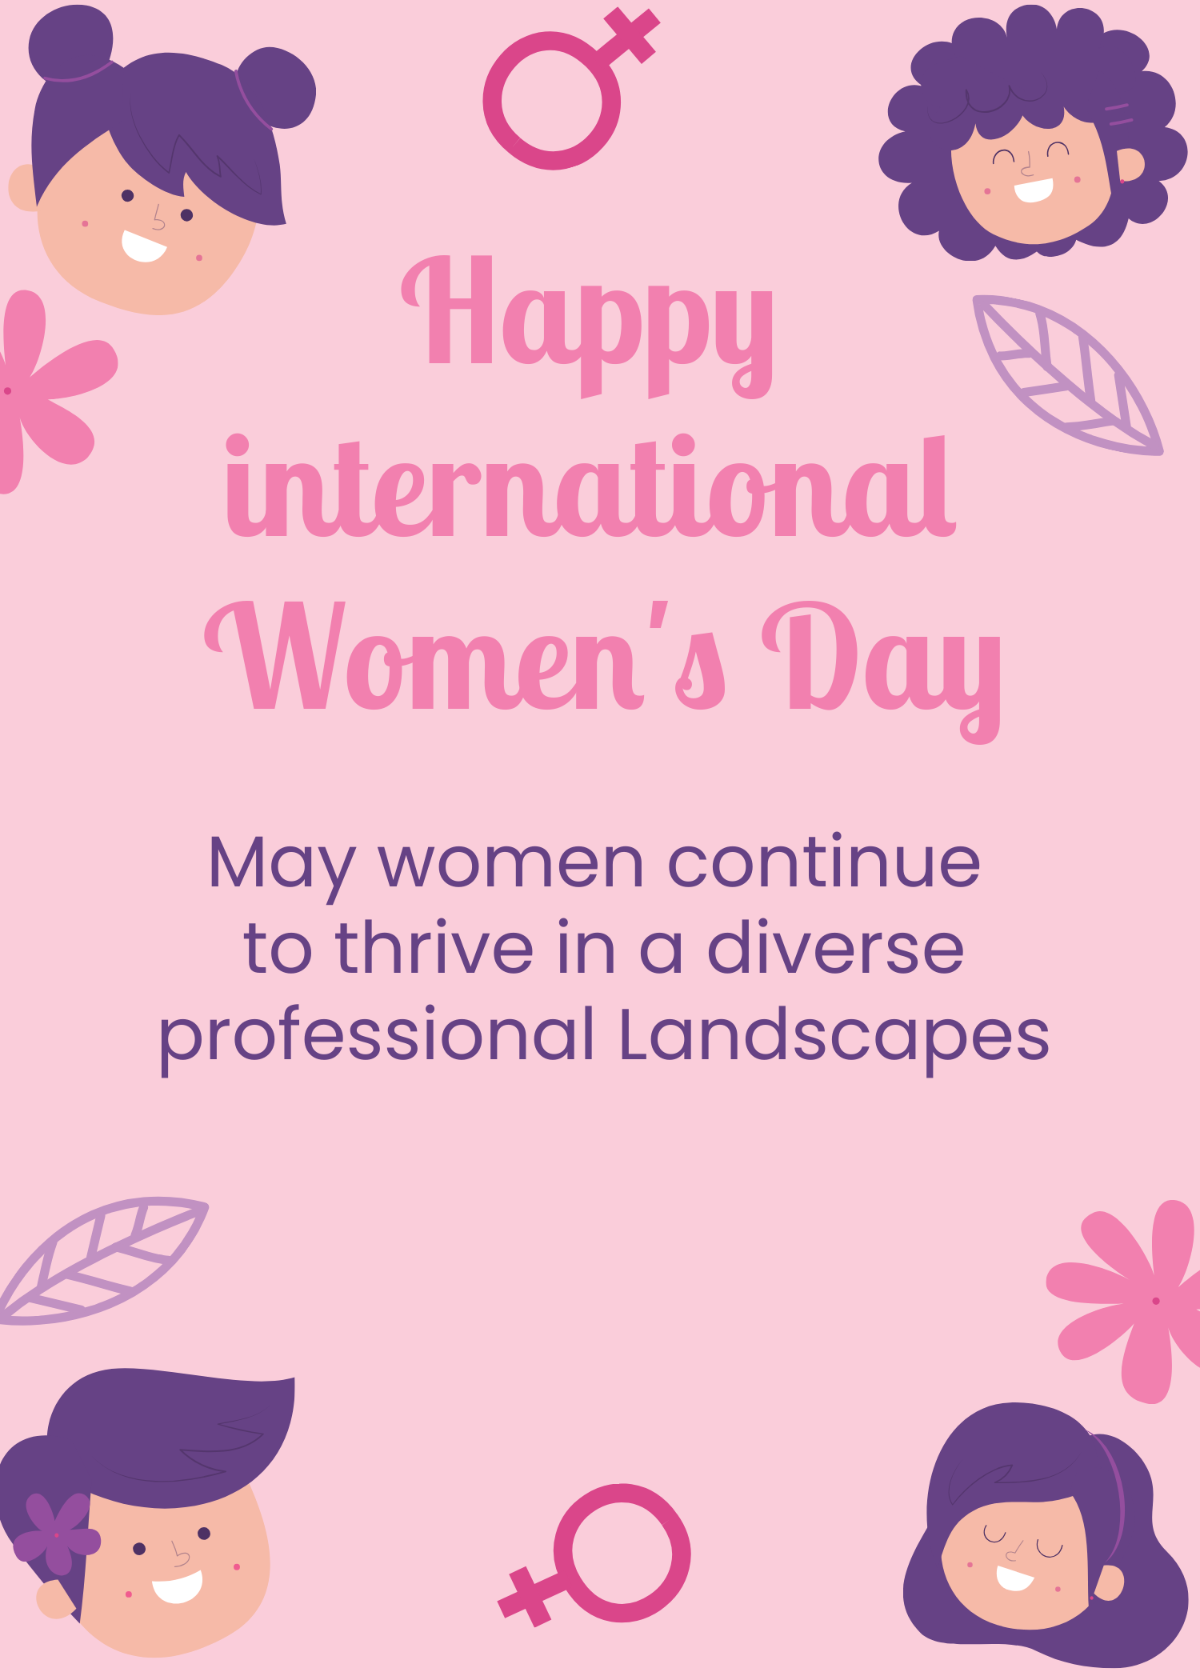 International Women's Day Wishes Card Template